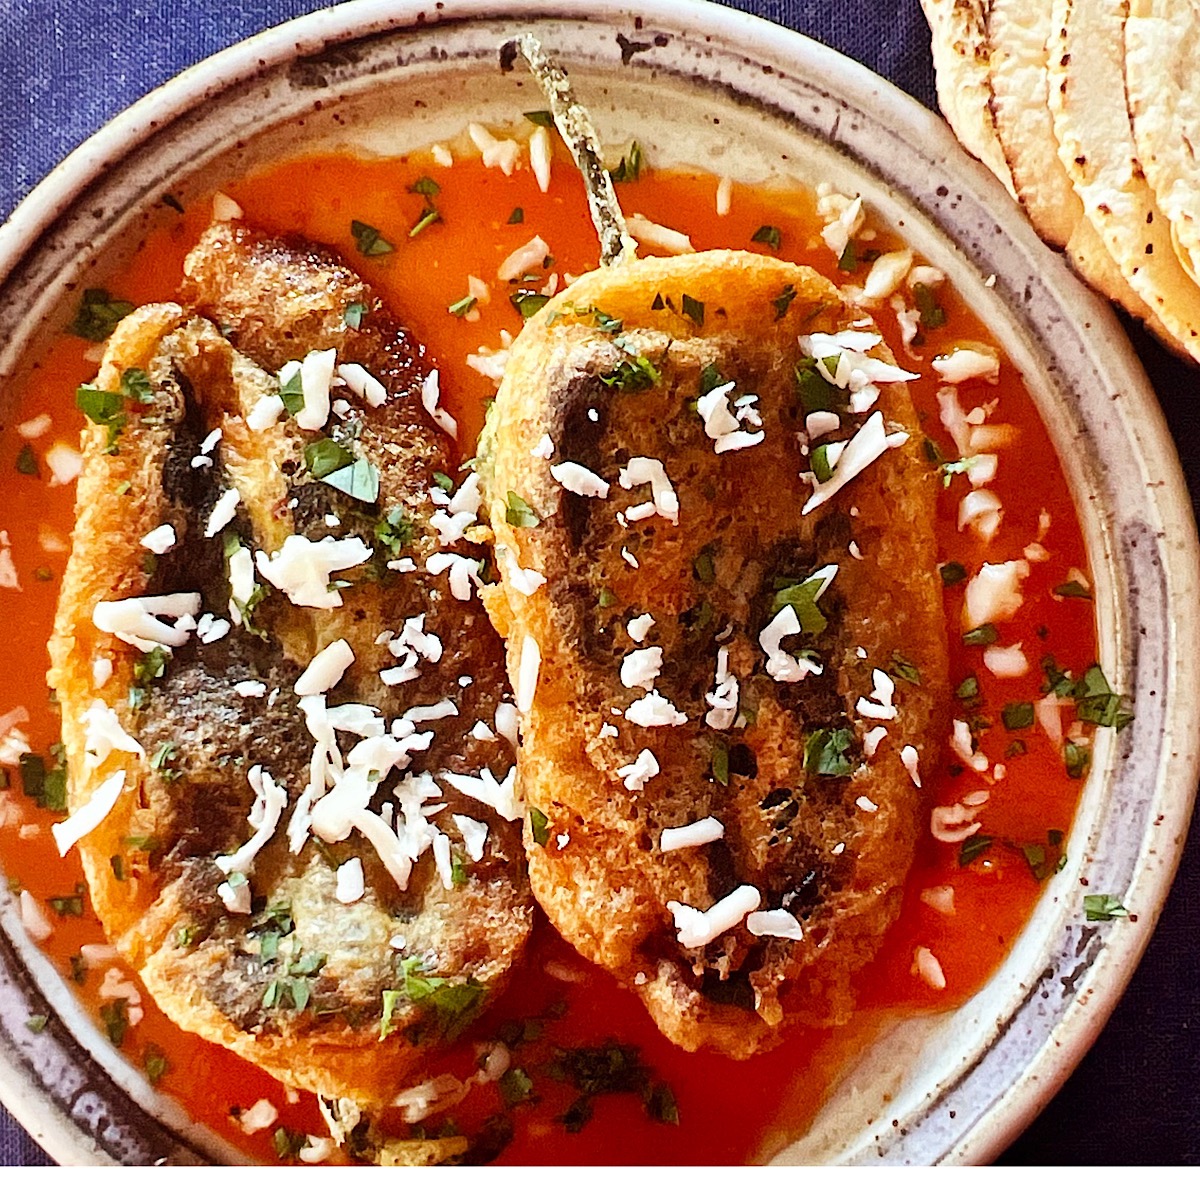 Two egg-battered chile rellenos in red sauce on a plate.